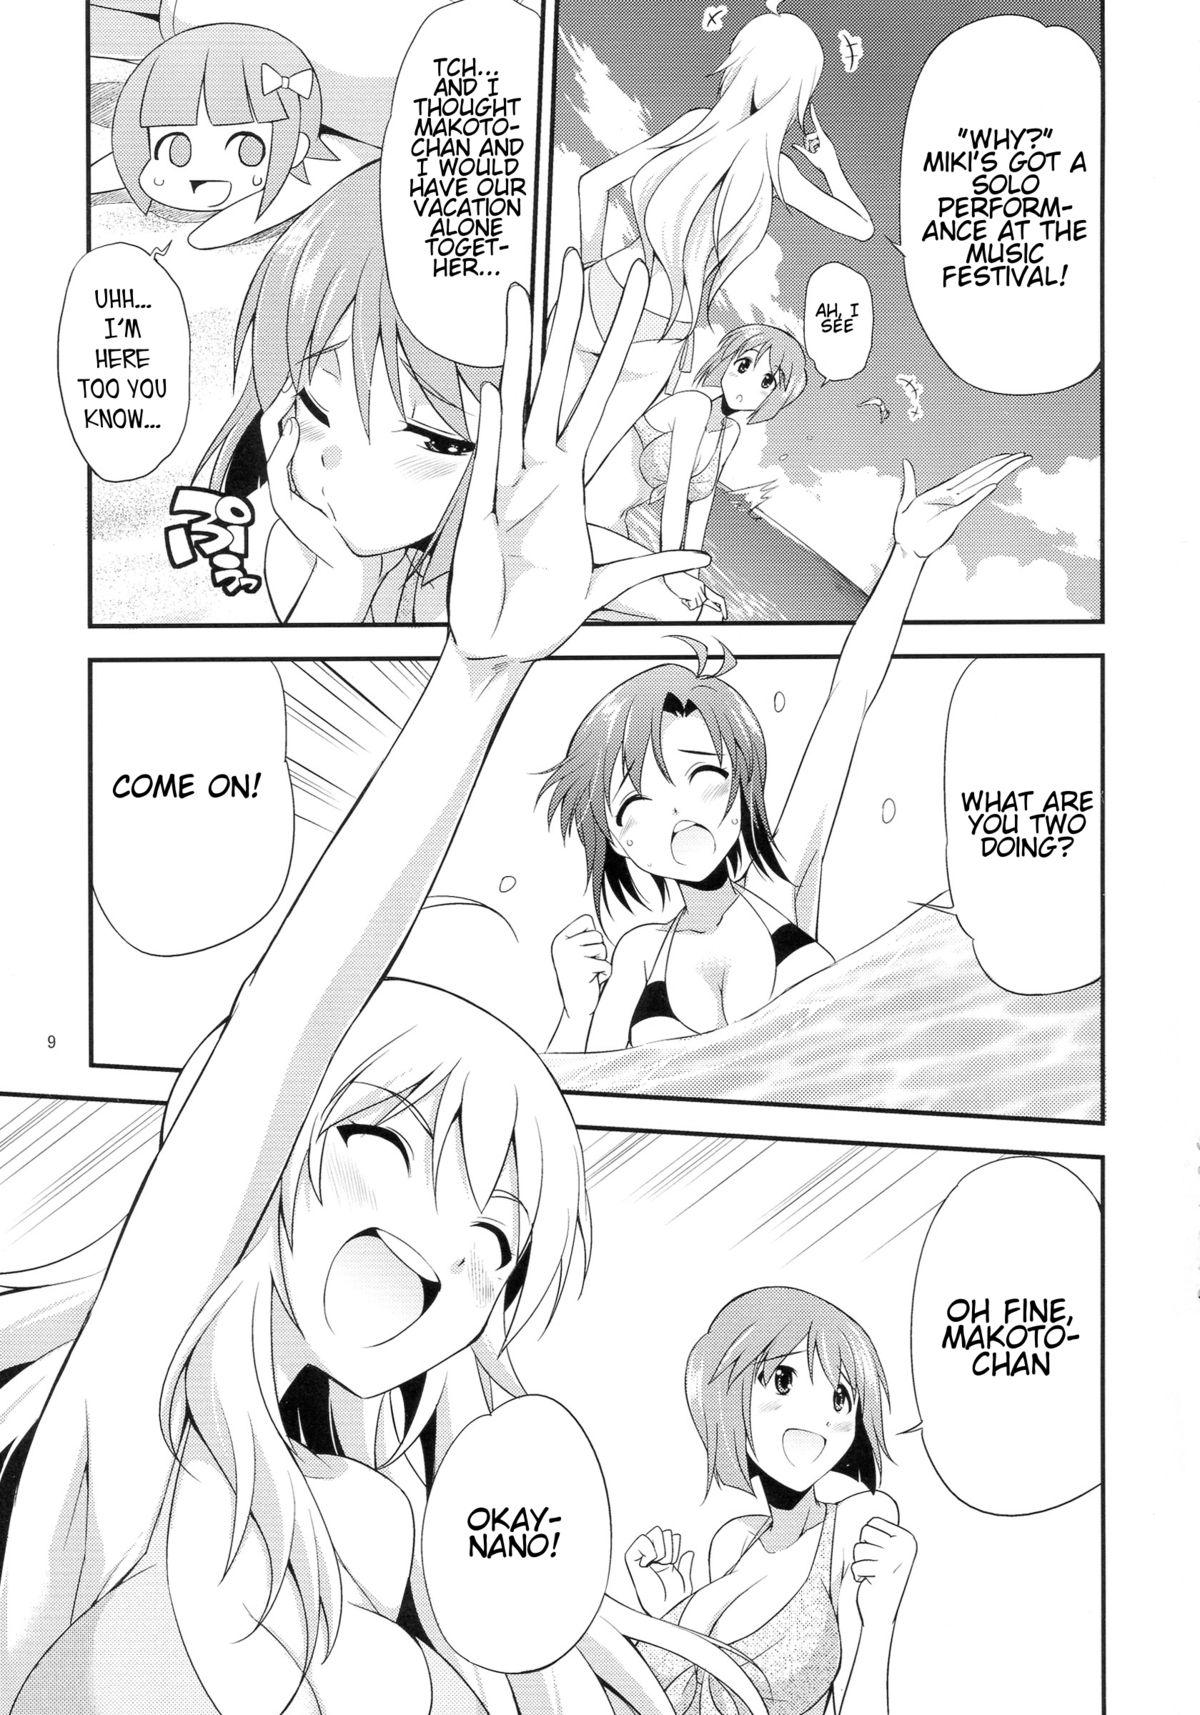 Jerking THE iDOL M@STER SHINY FESTA - The idolmaster Calle - Page 8